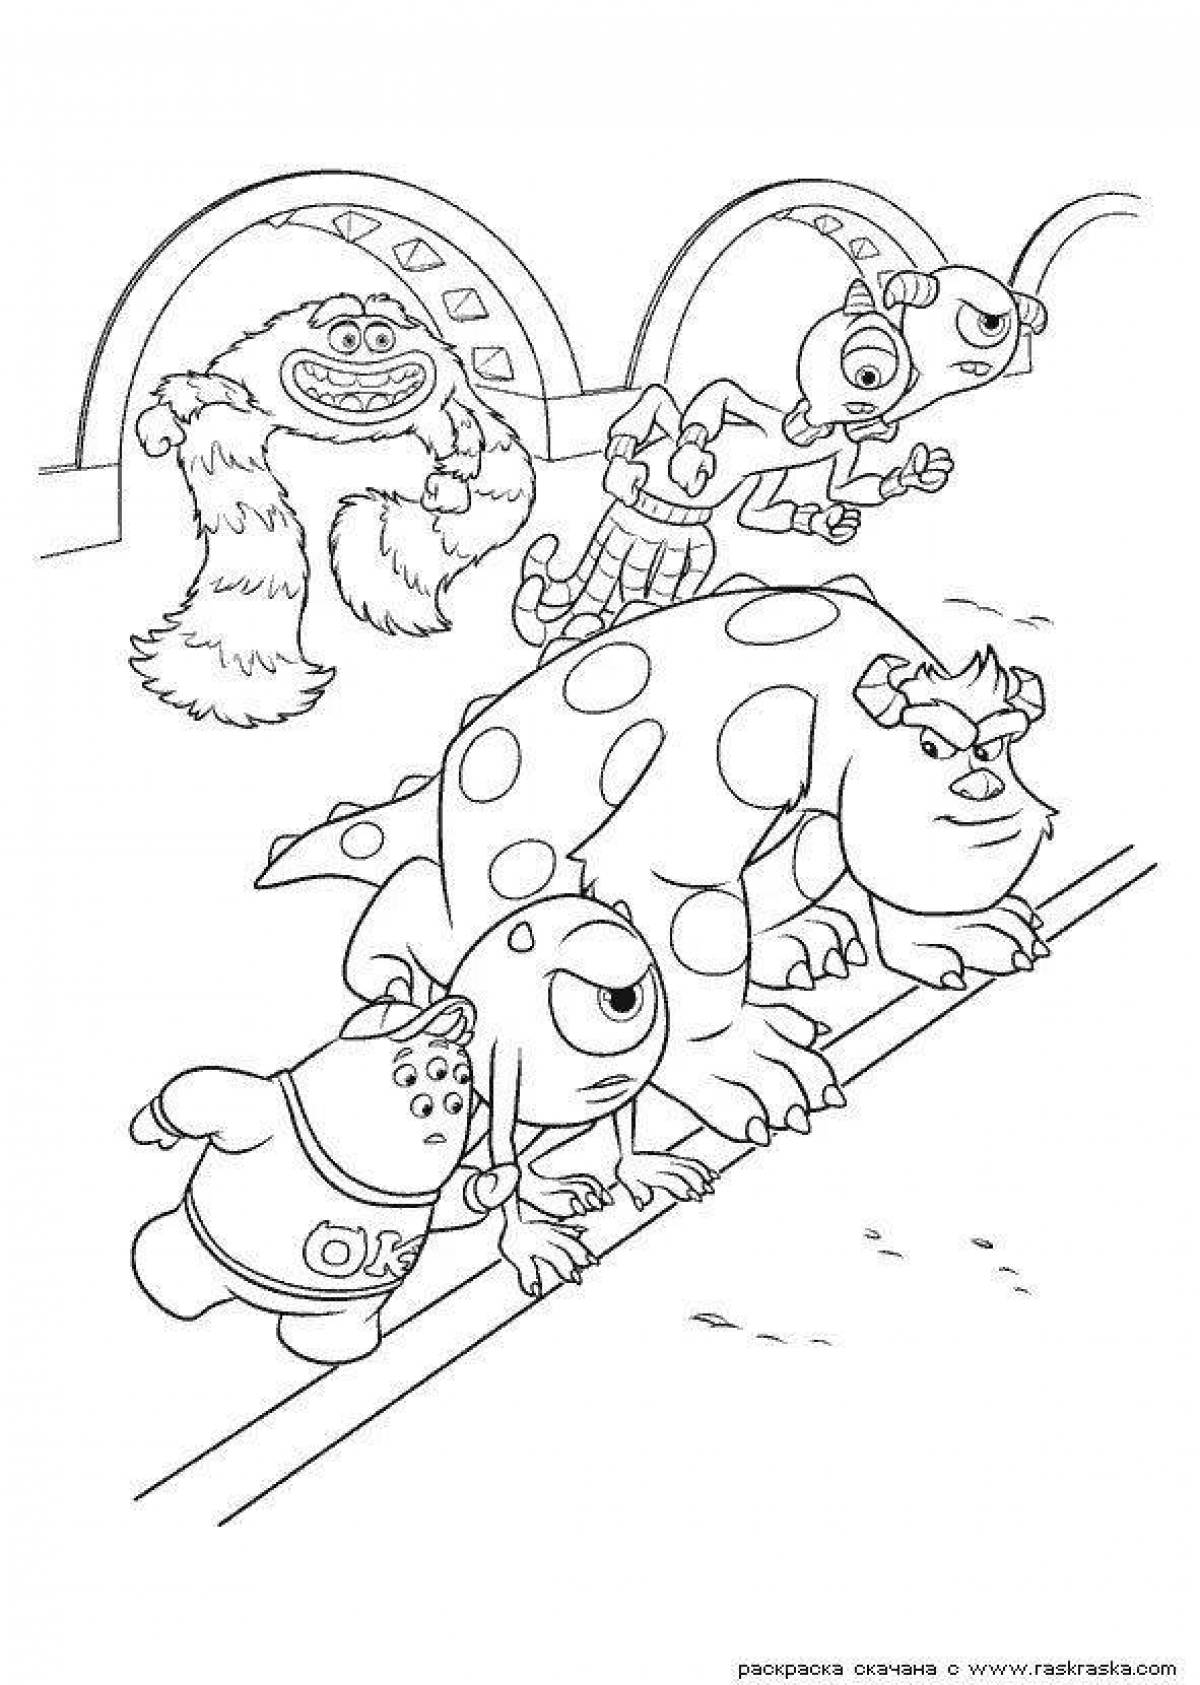 Dazzling Monsters University coloring page